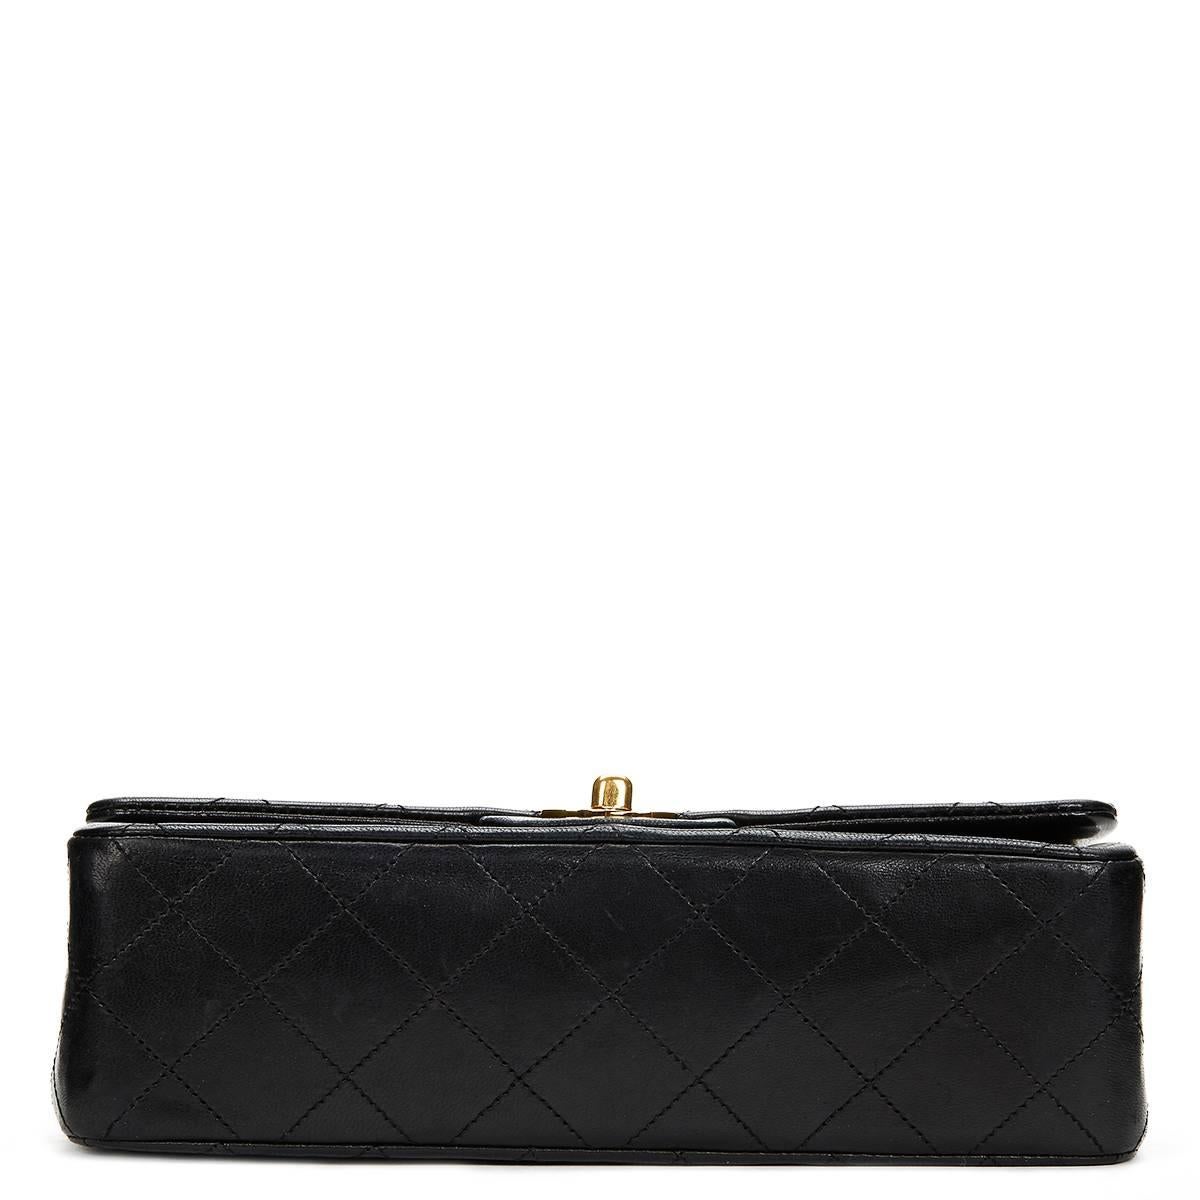 CHANEL
Black Quilted Lambskin Vintage Small Classic Double Flap Bag

This CHANEL Small Classic Double Flap Bag is in Very Good Pre-Owned Condition accompanied by Authenticity Card. Circa 1987. Primarily made from Lambskin Leather complimented by